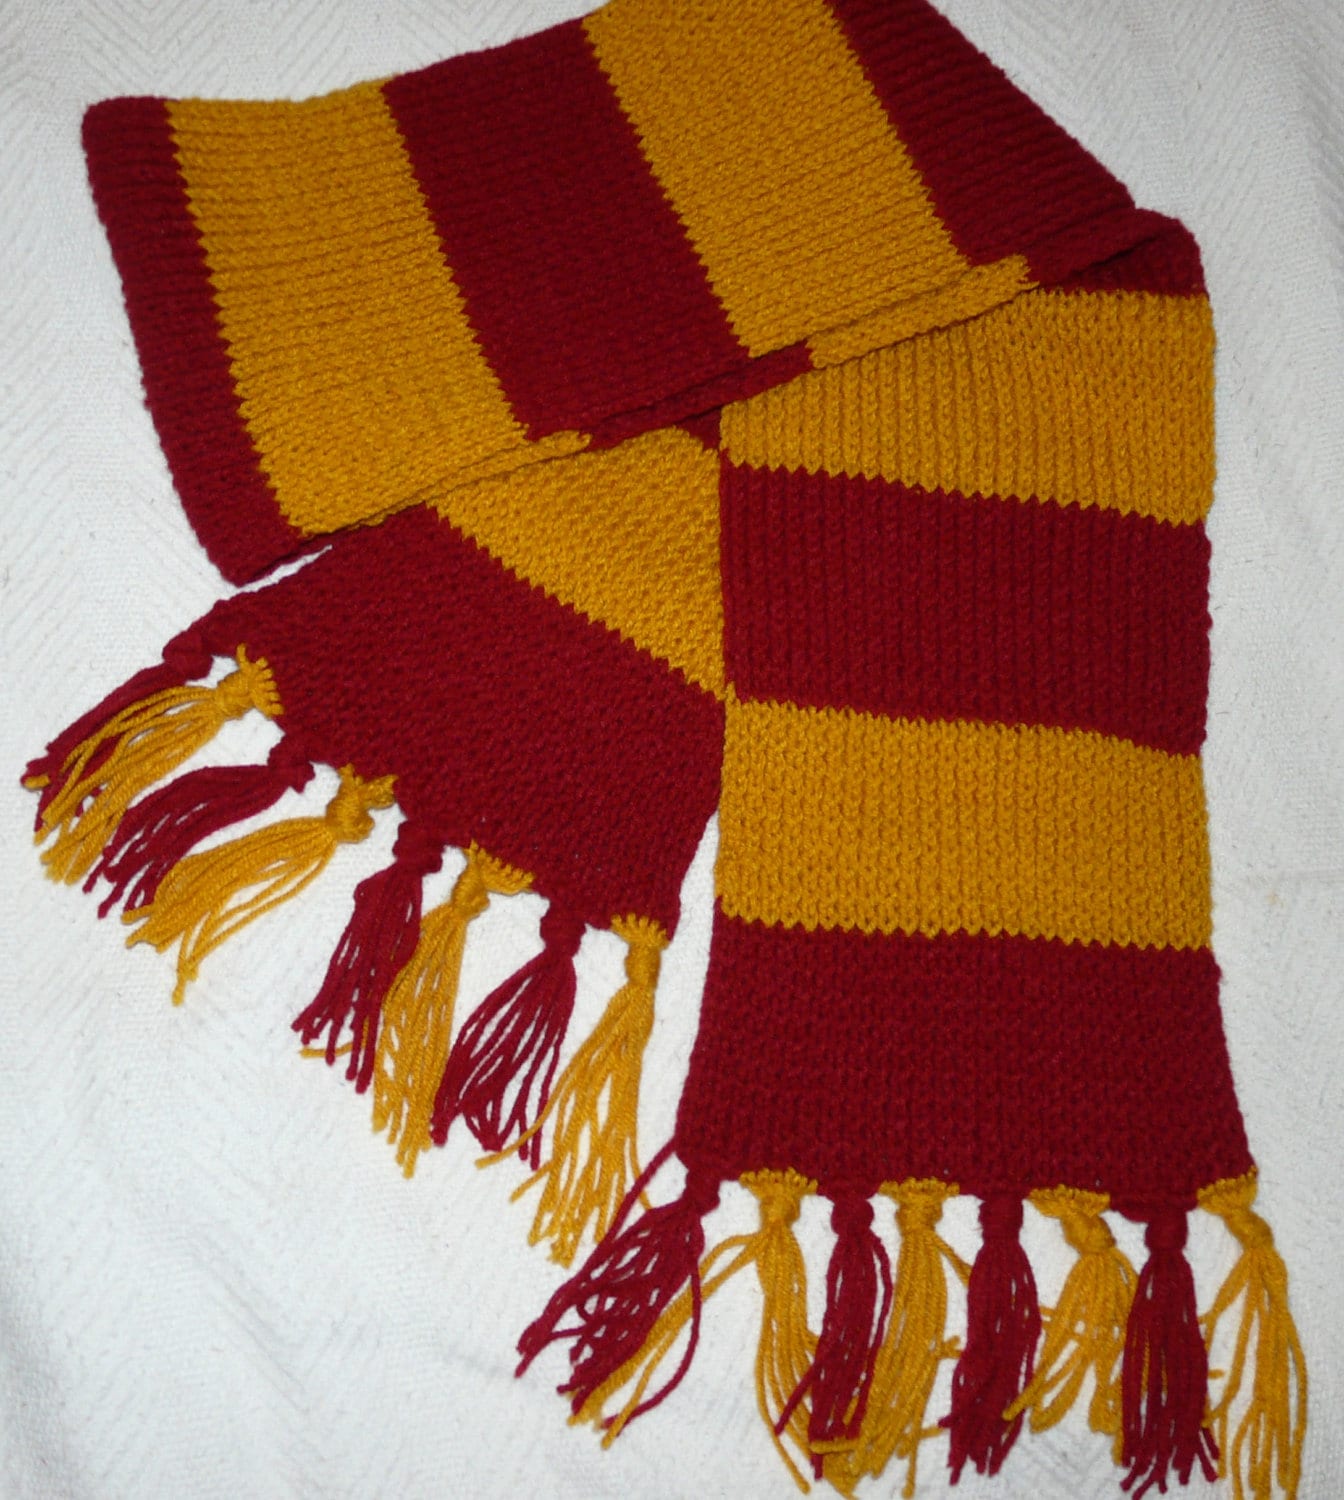 Harry Potter Gryffindor knit scarf with tassels by AinsDesign